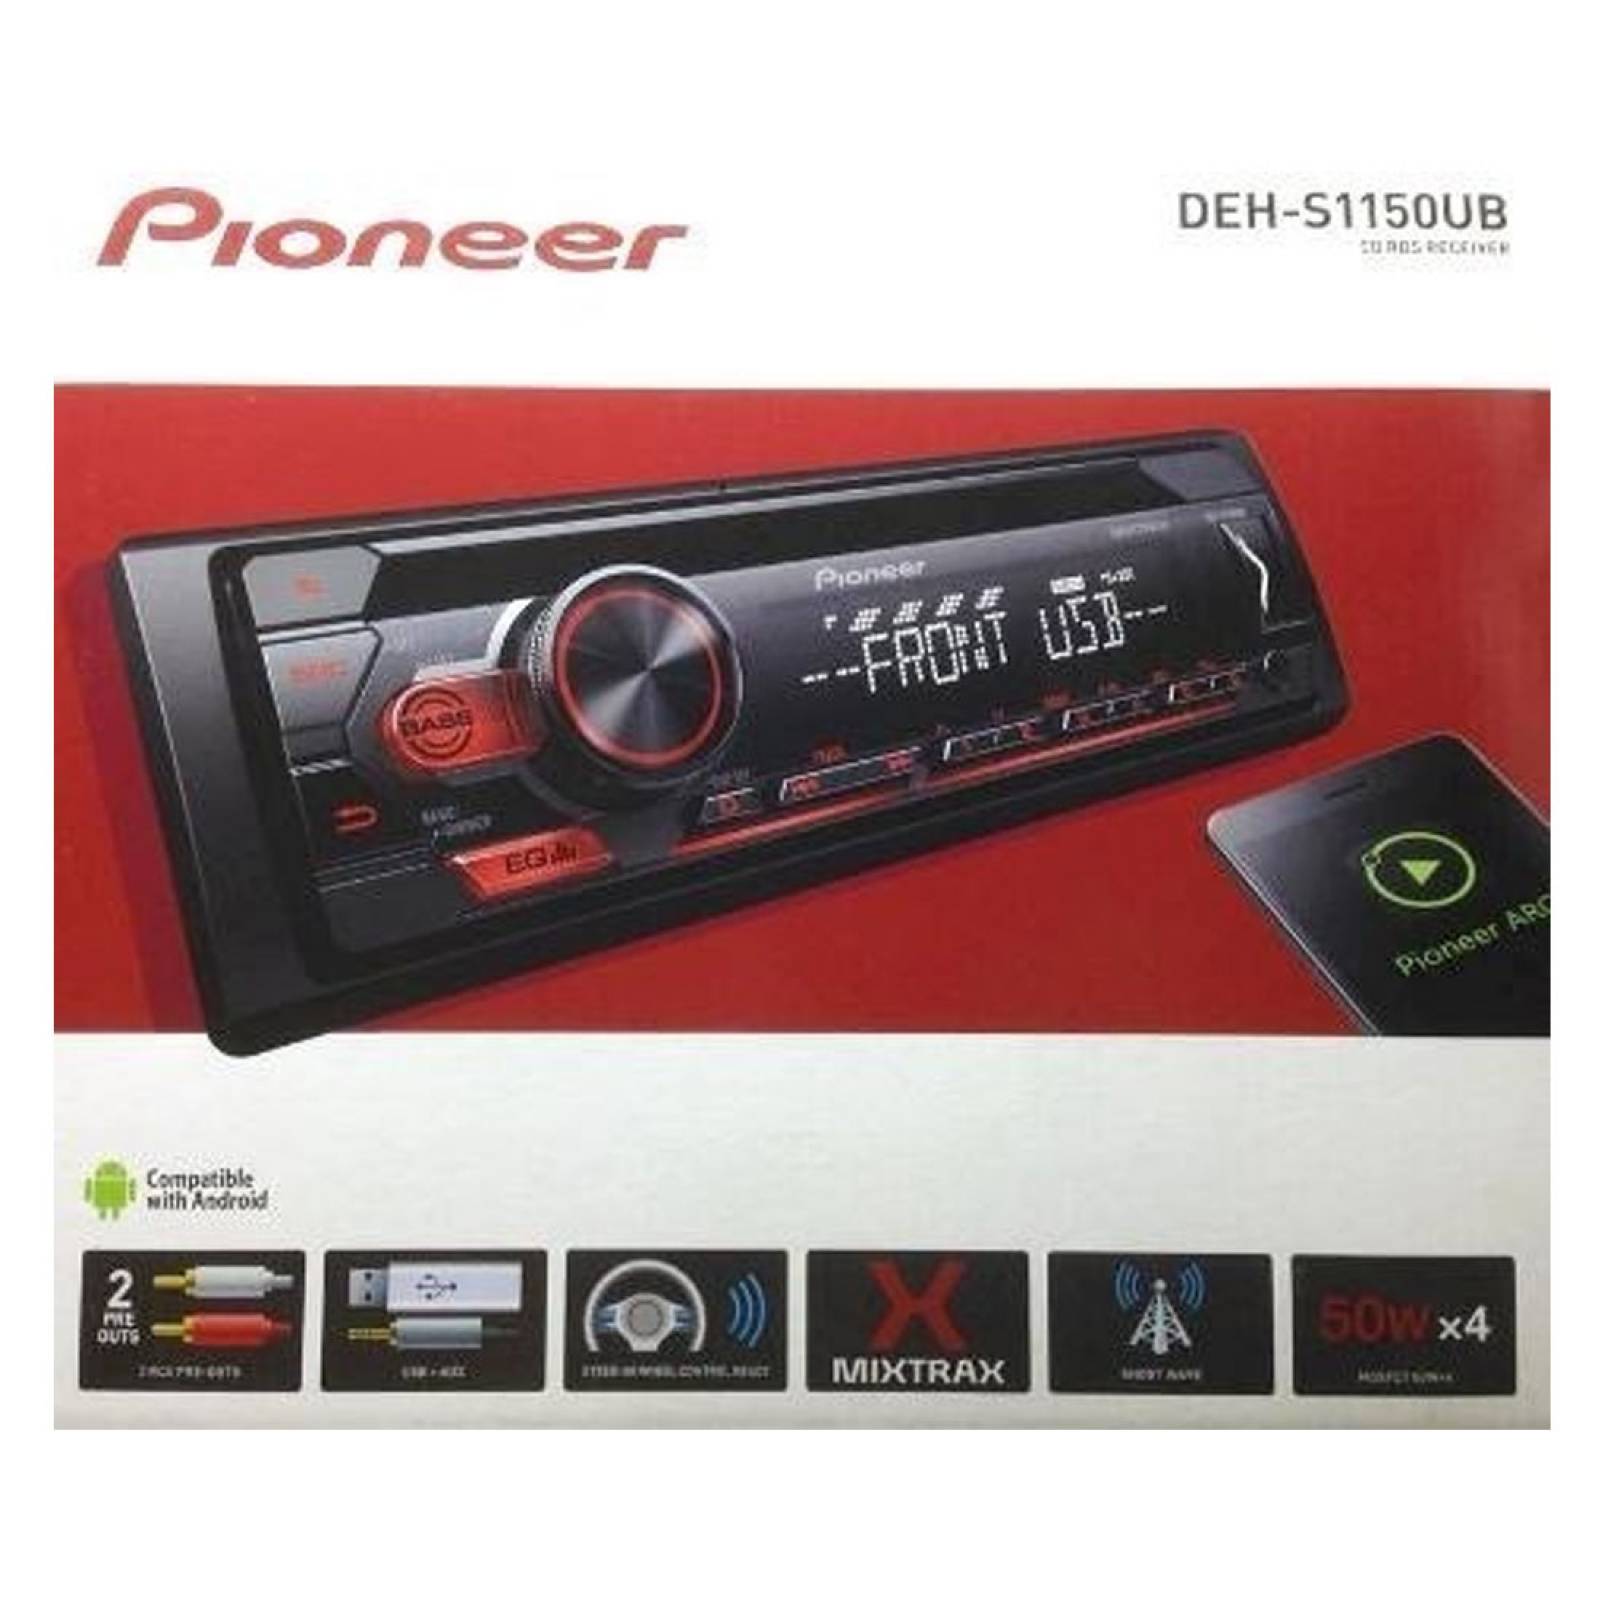 Auto Estéreo Cd USB Mp3 Android DEH-S1150UB Pioneer